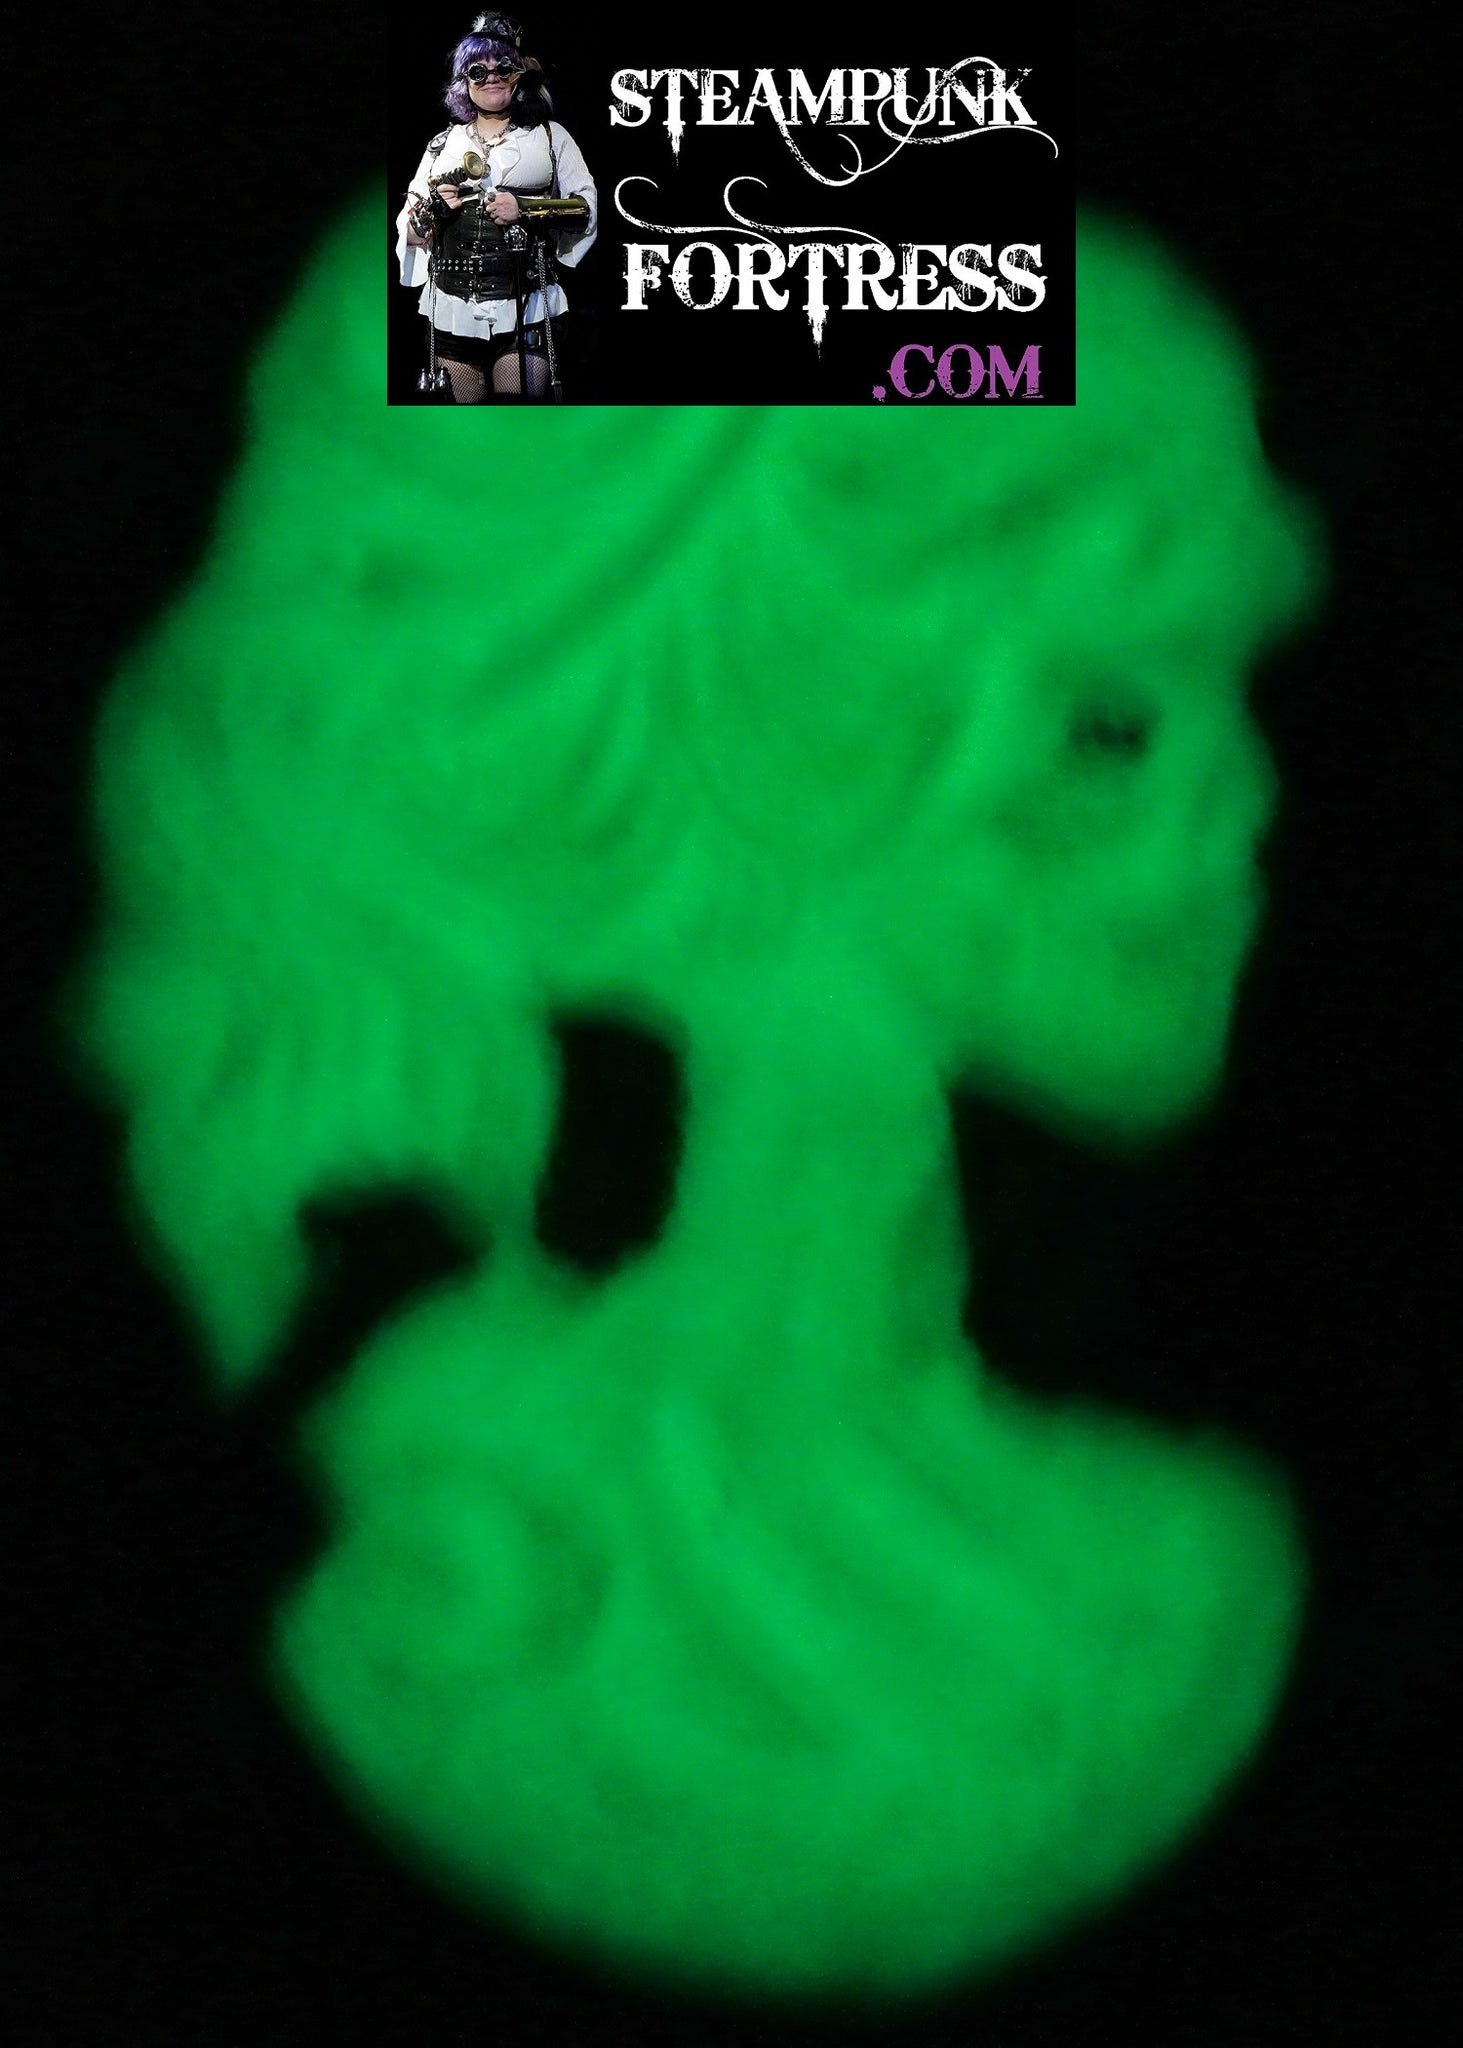 GLOW IN THE DARK PIN BROOCH SILVER CAMEO LADY SKELETON BLACK BACKGROUND NECKLACE HALLOWEEN STARR WILDE STEAMPUNK FORTRESS